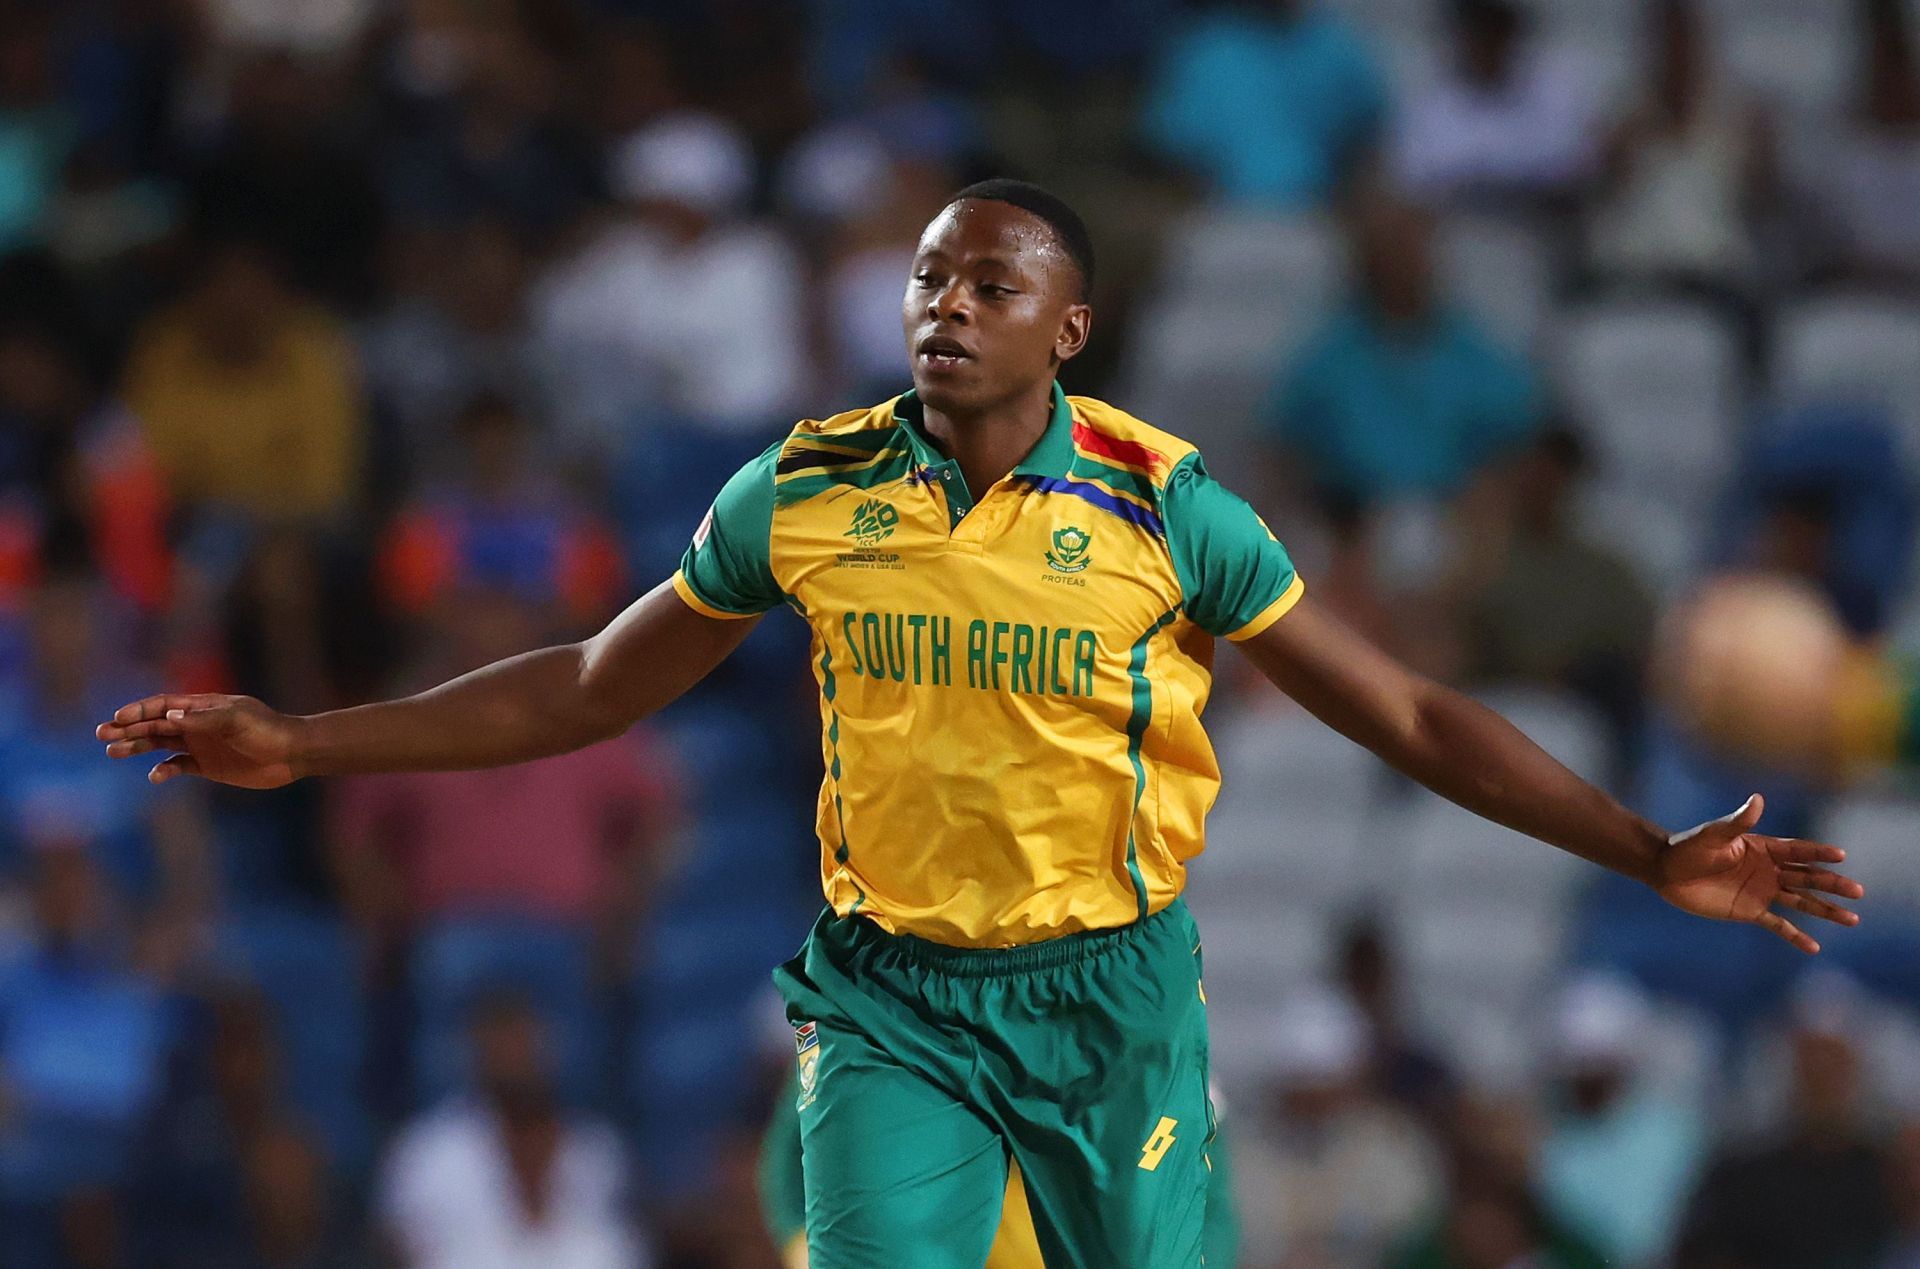 Kagiso Rabada has excelled with the ball for South Africa. (Image Credit: Getty Images)